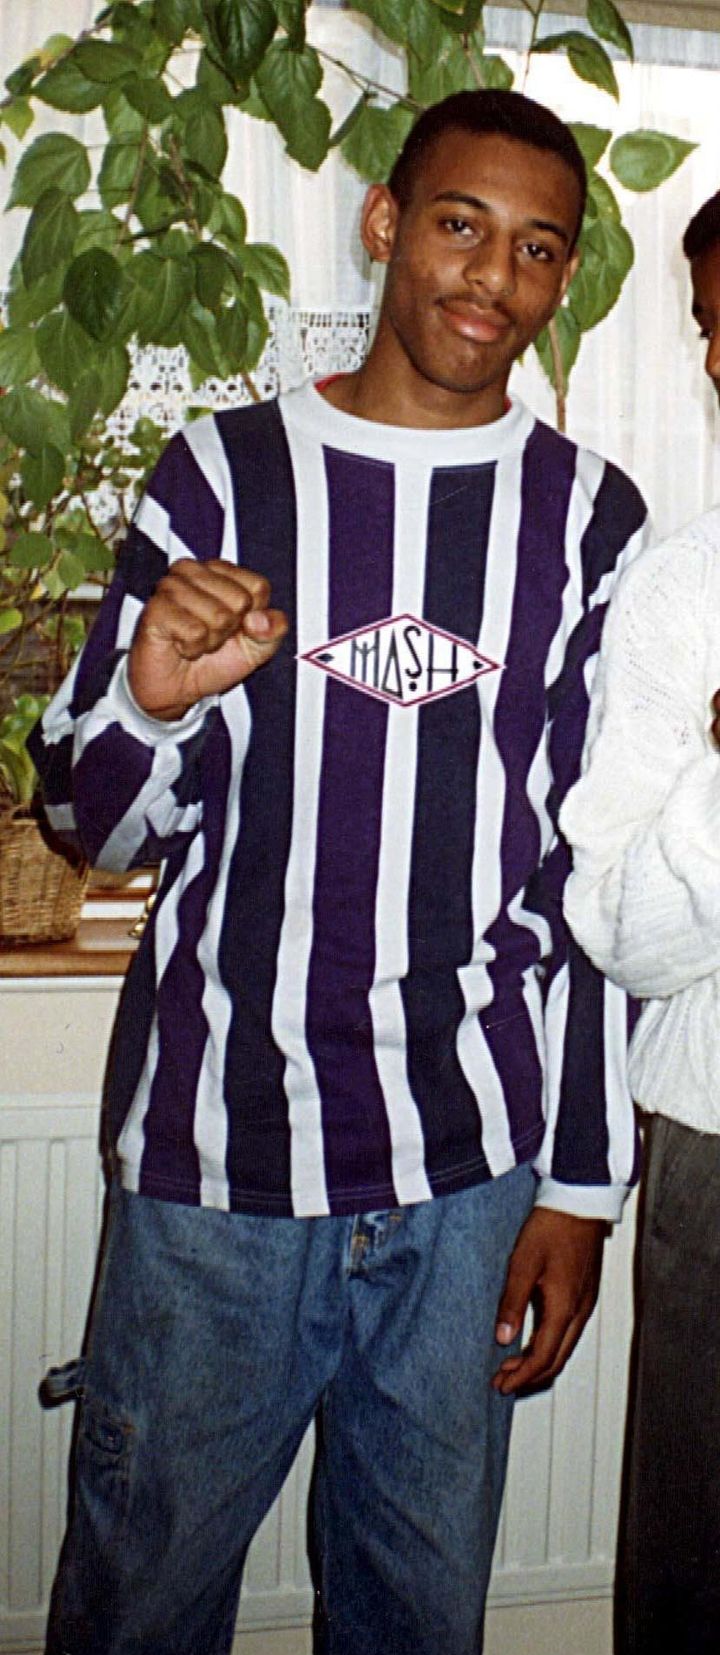 Stephen Lawrence was murdered on 22 April 1993